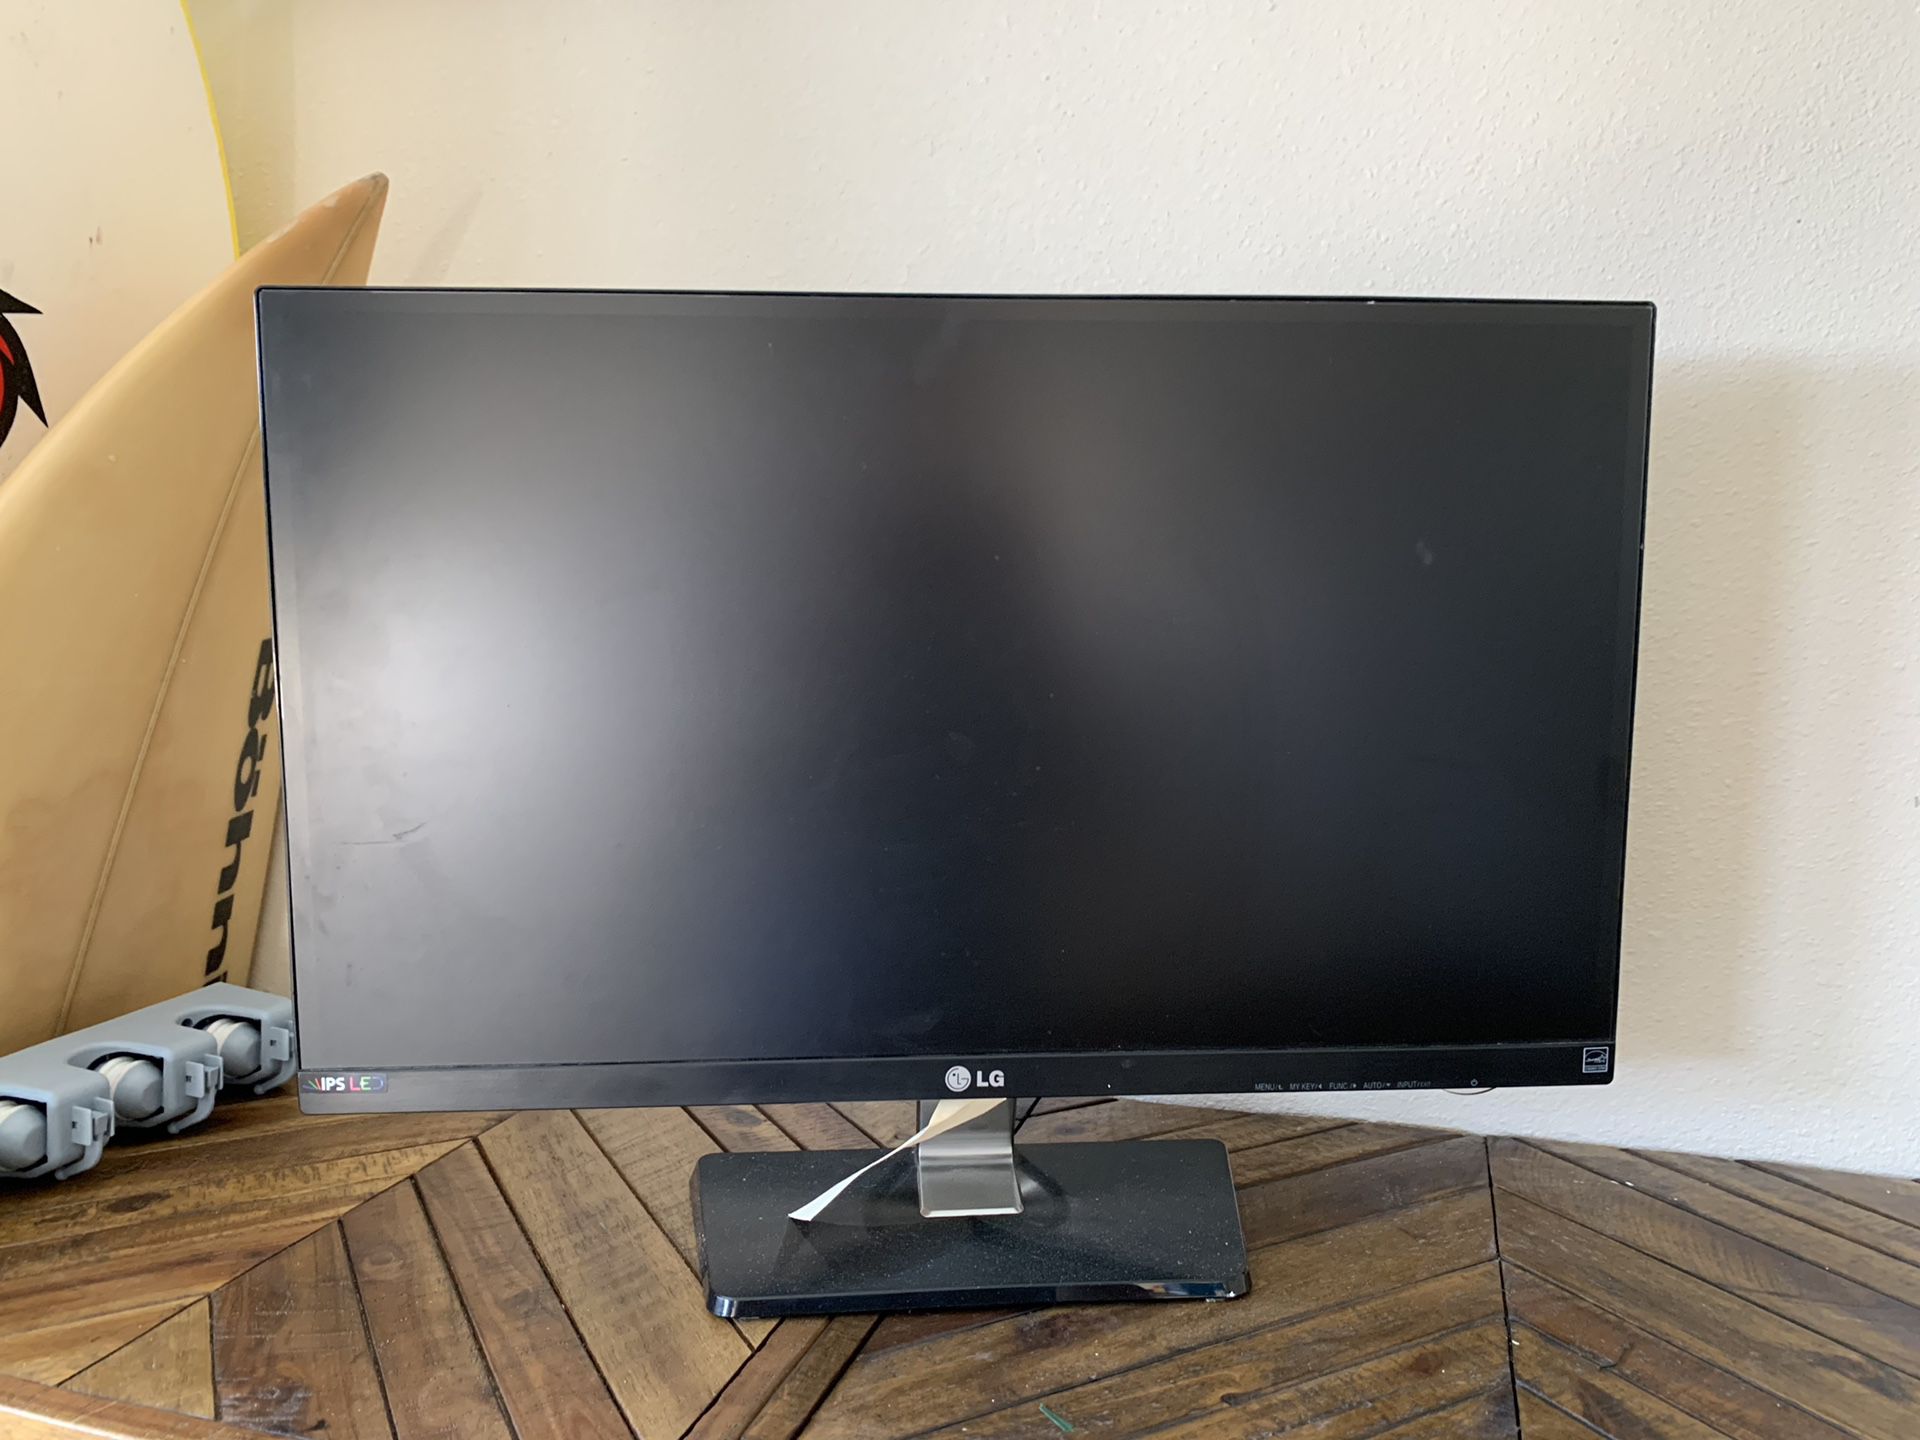 LG IPS LED Monitor New- Missing DC power cable